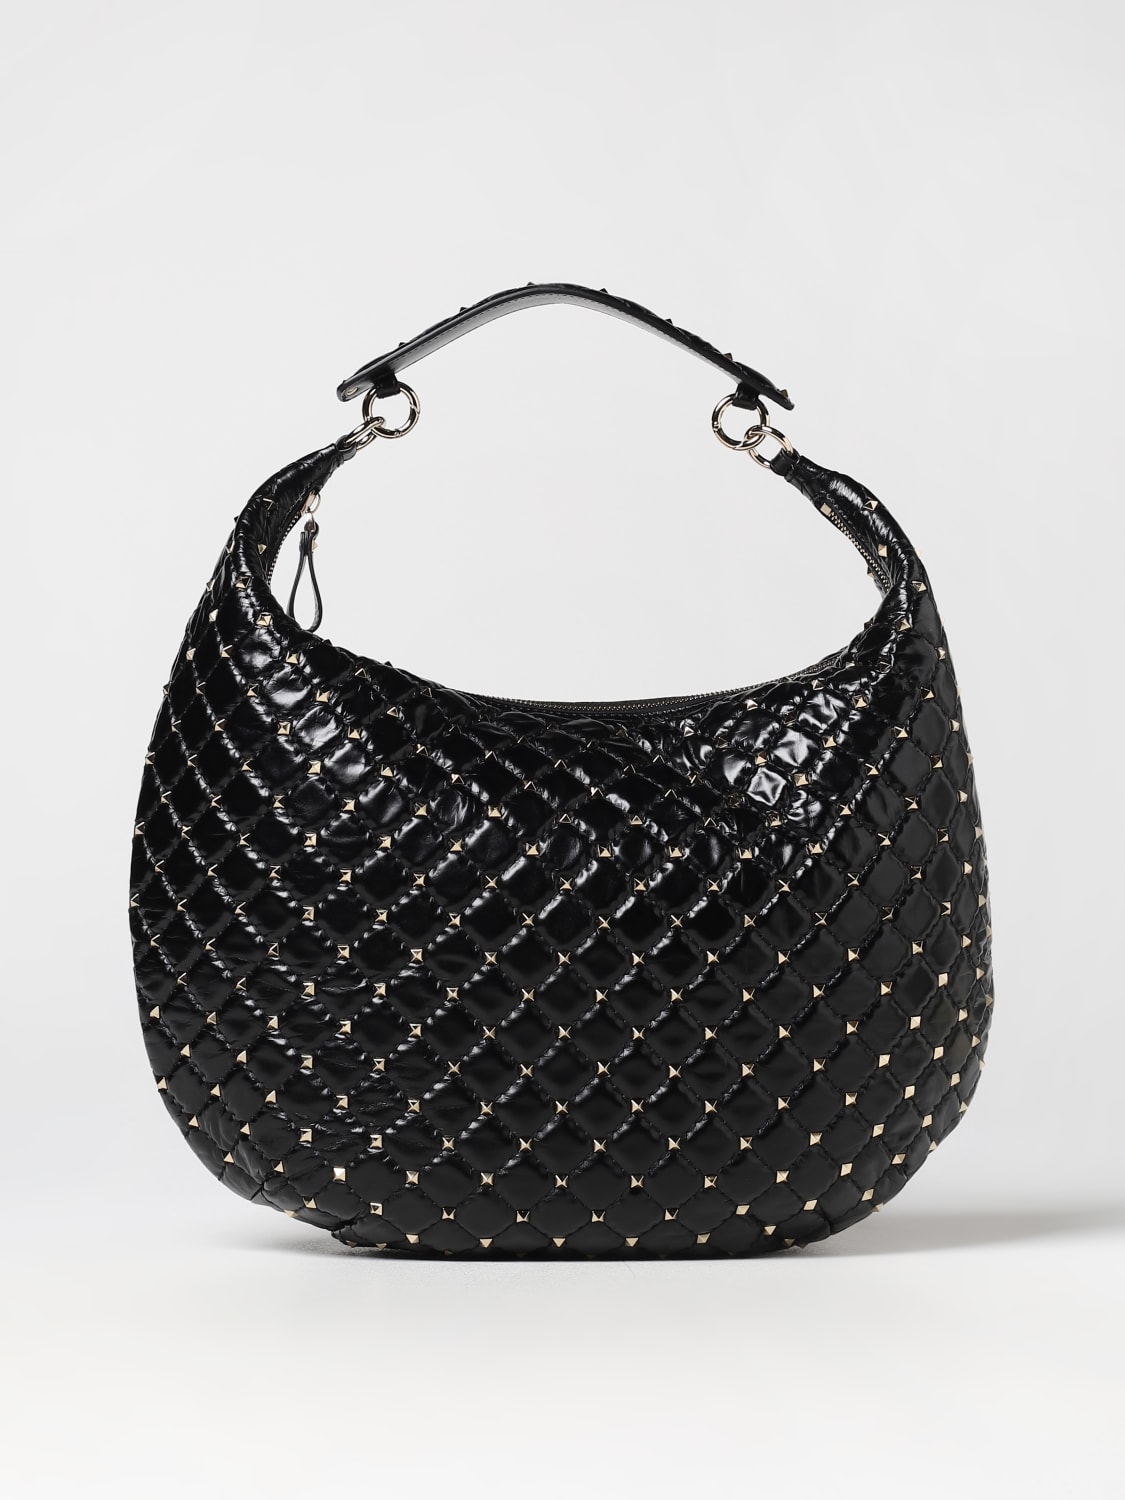 Valentino Garavani Rockstud Spike bag in quilted nappa with studs